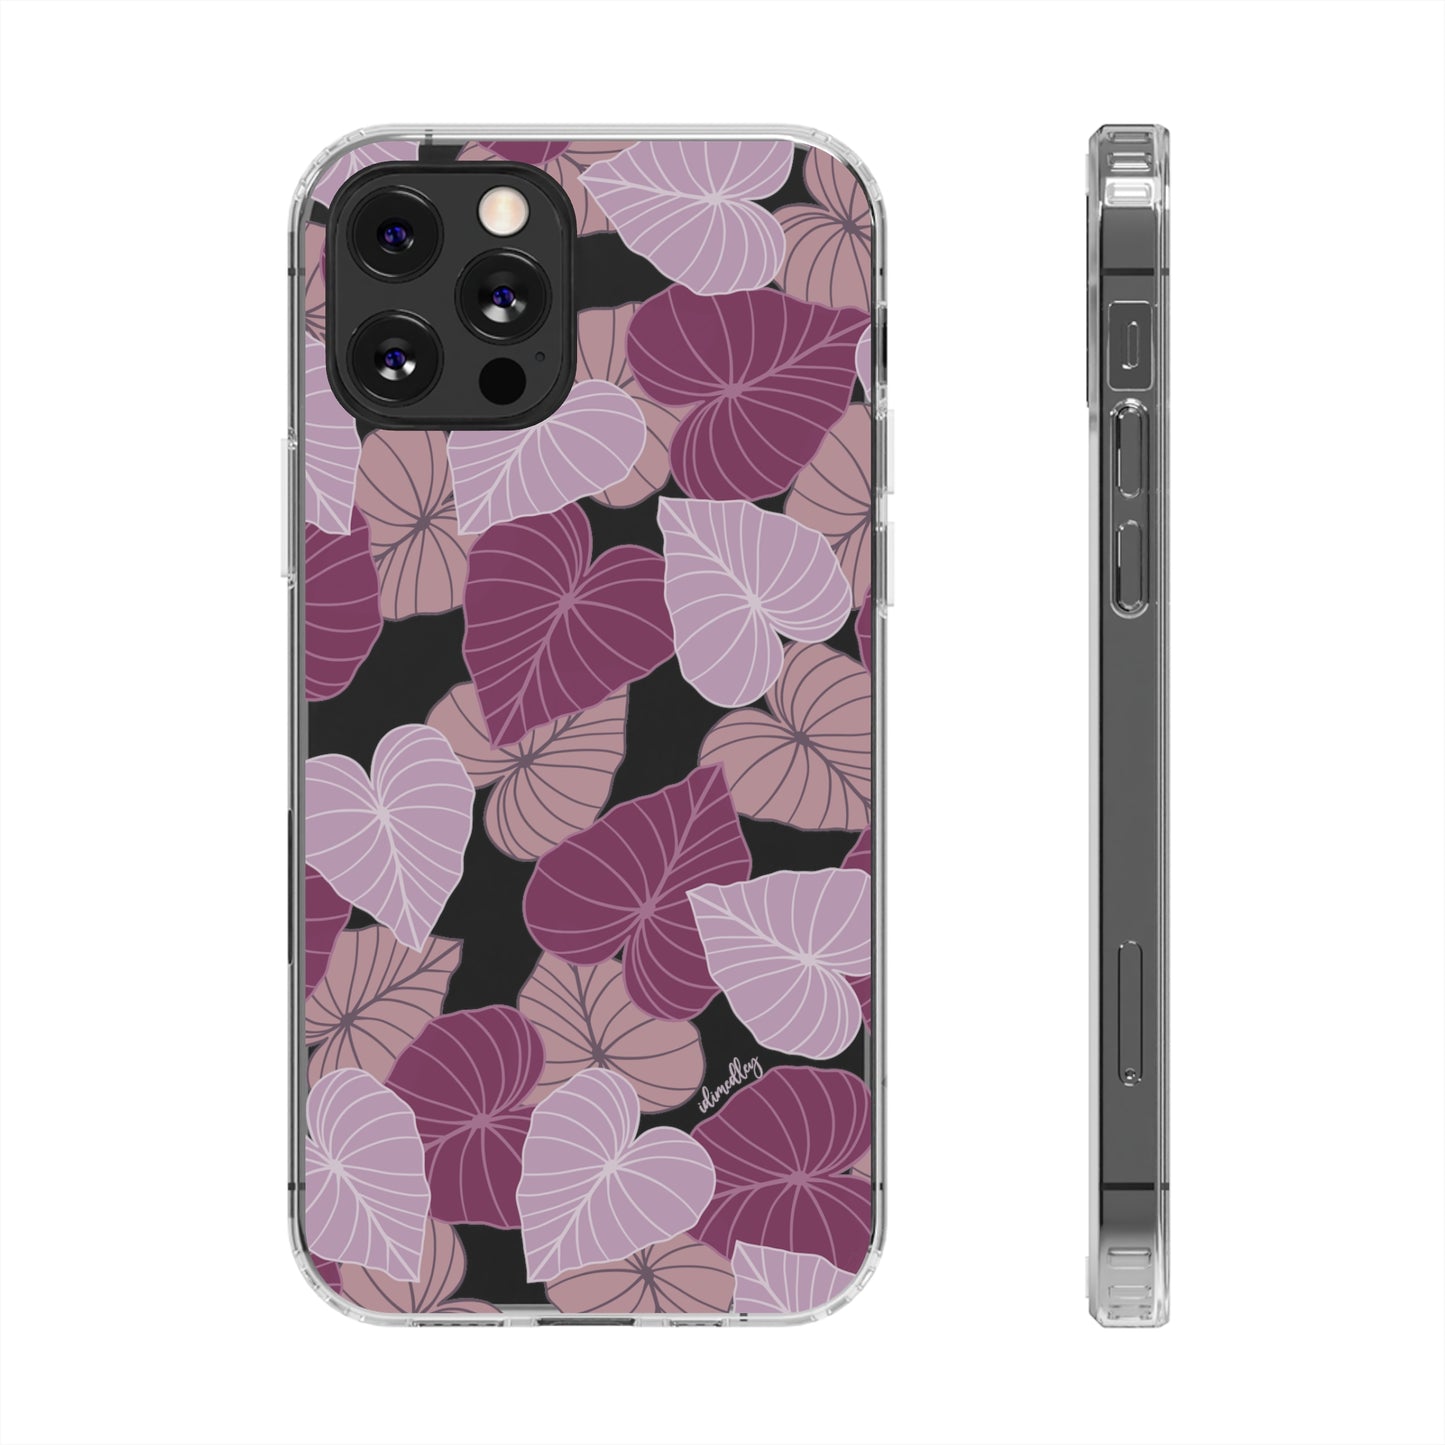 Kalo Pinks CLEAR Case